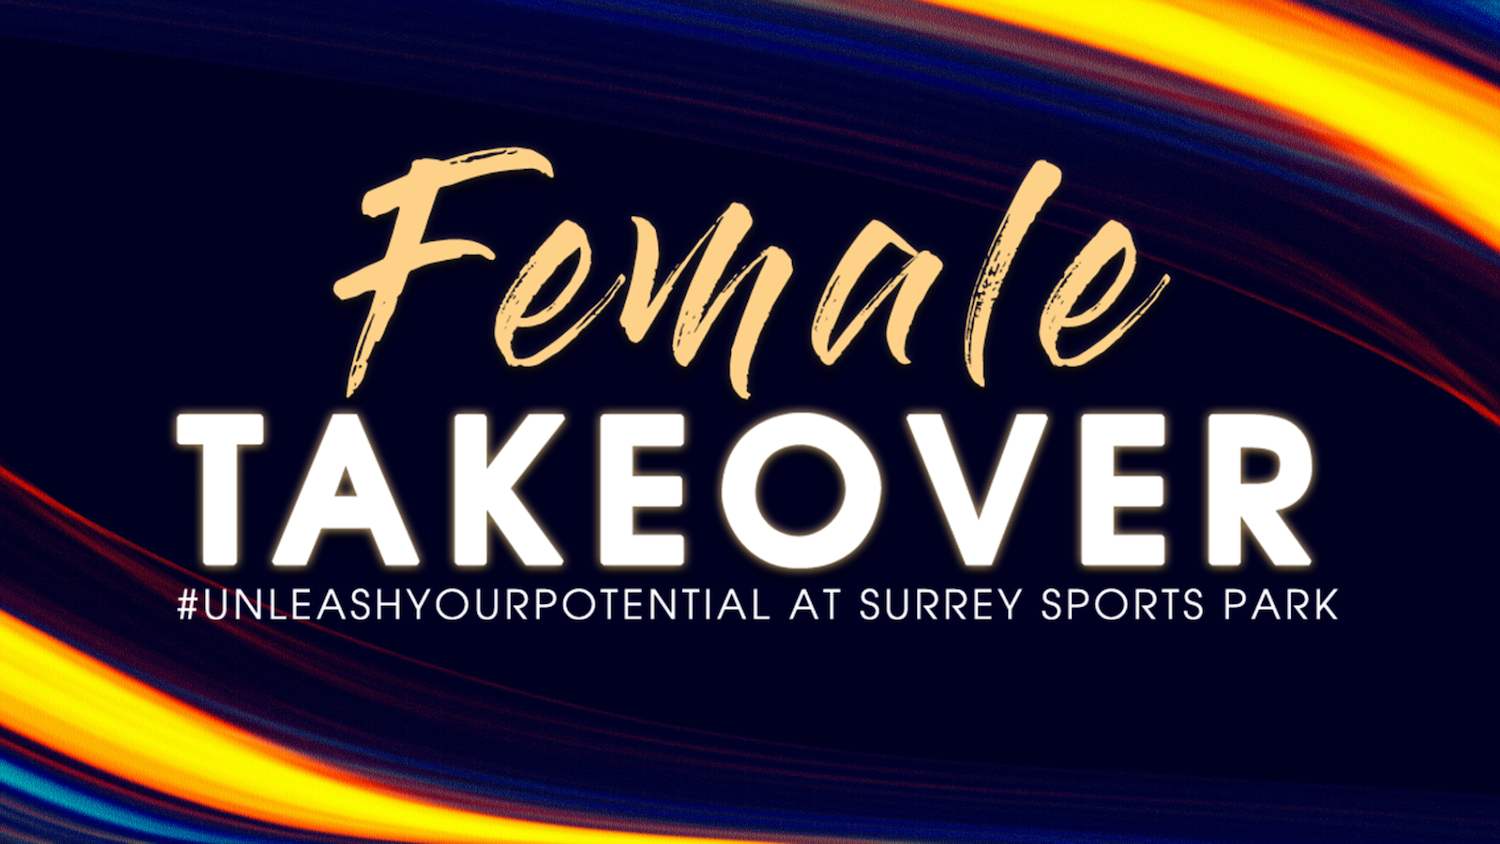 Unleash your potential at Female Takeover 2022! Team Surrey